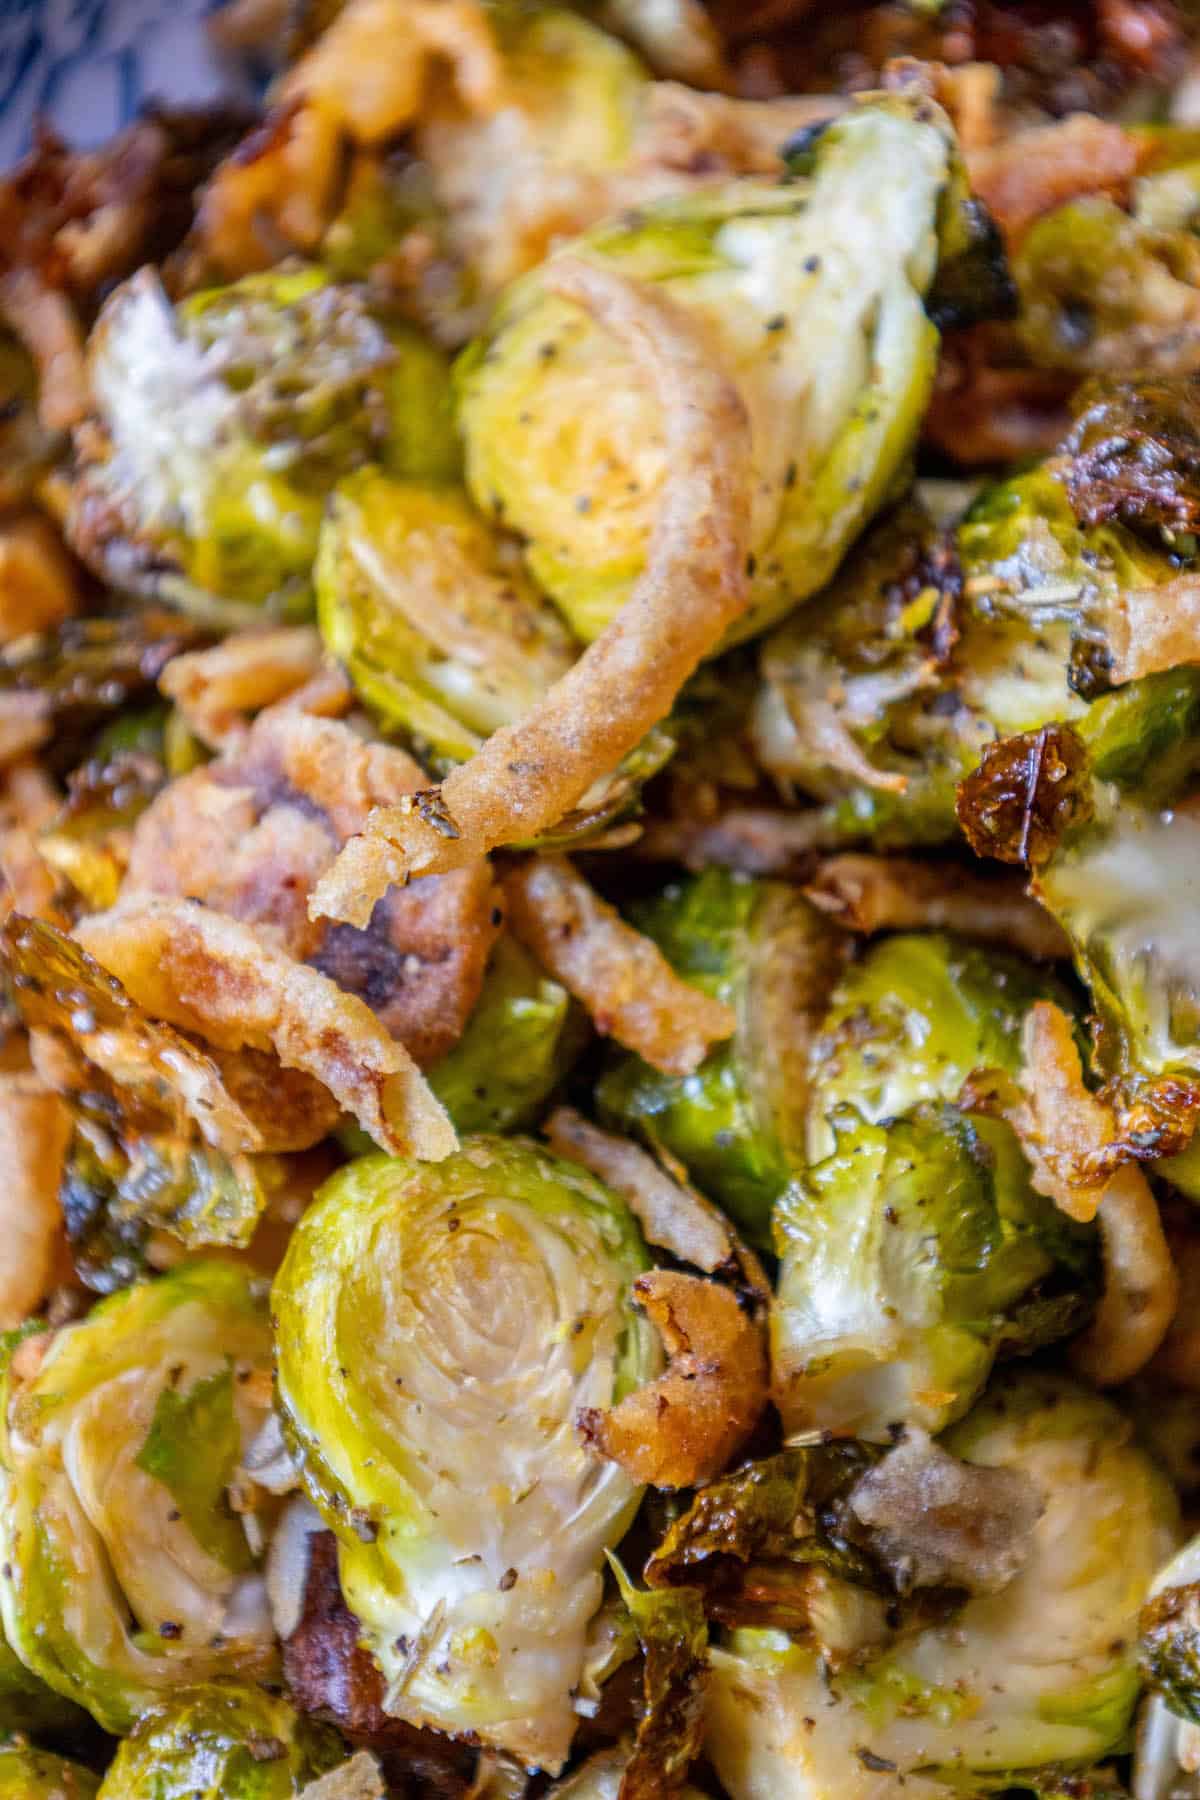 Roasted brussels sprouts with bacon and onions.